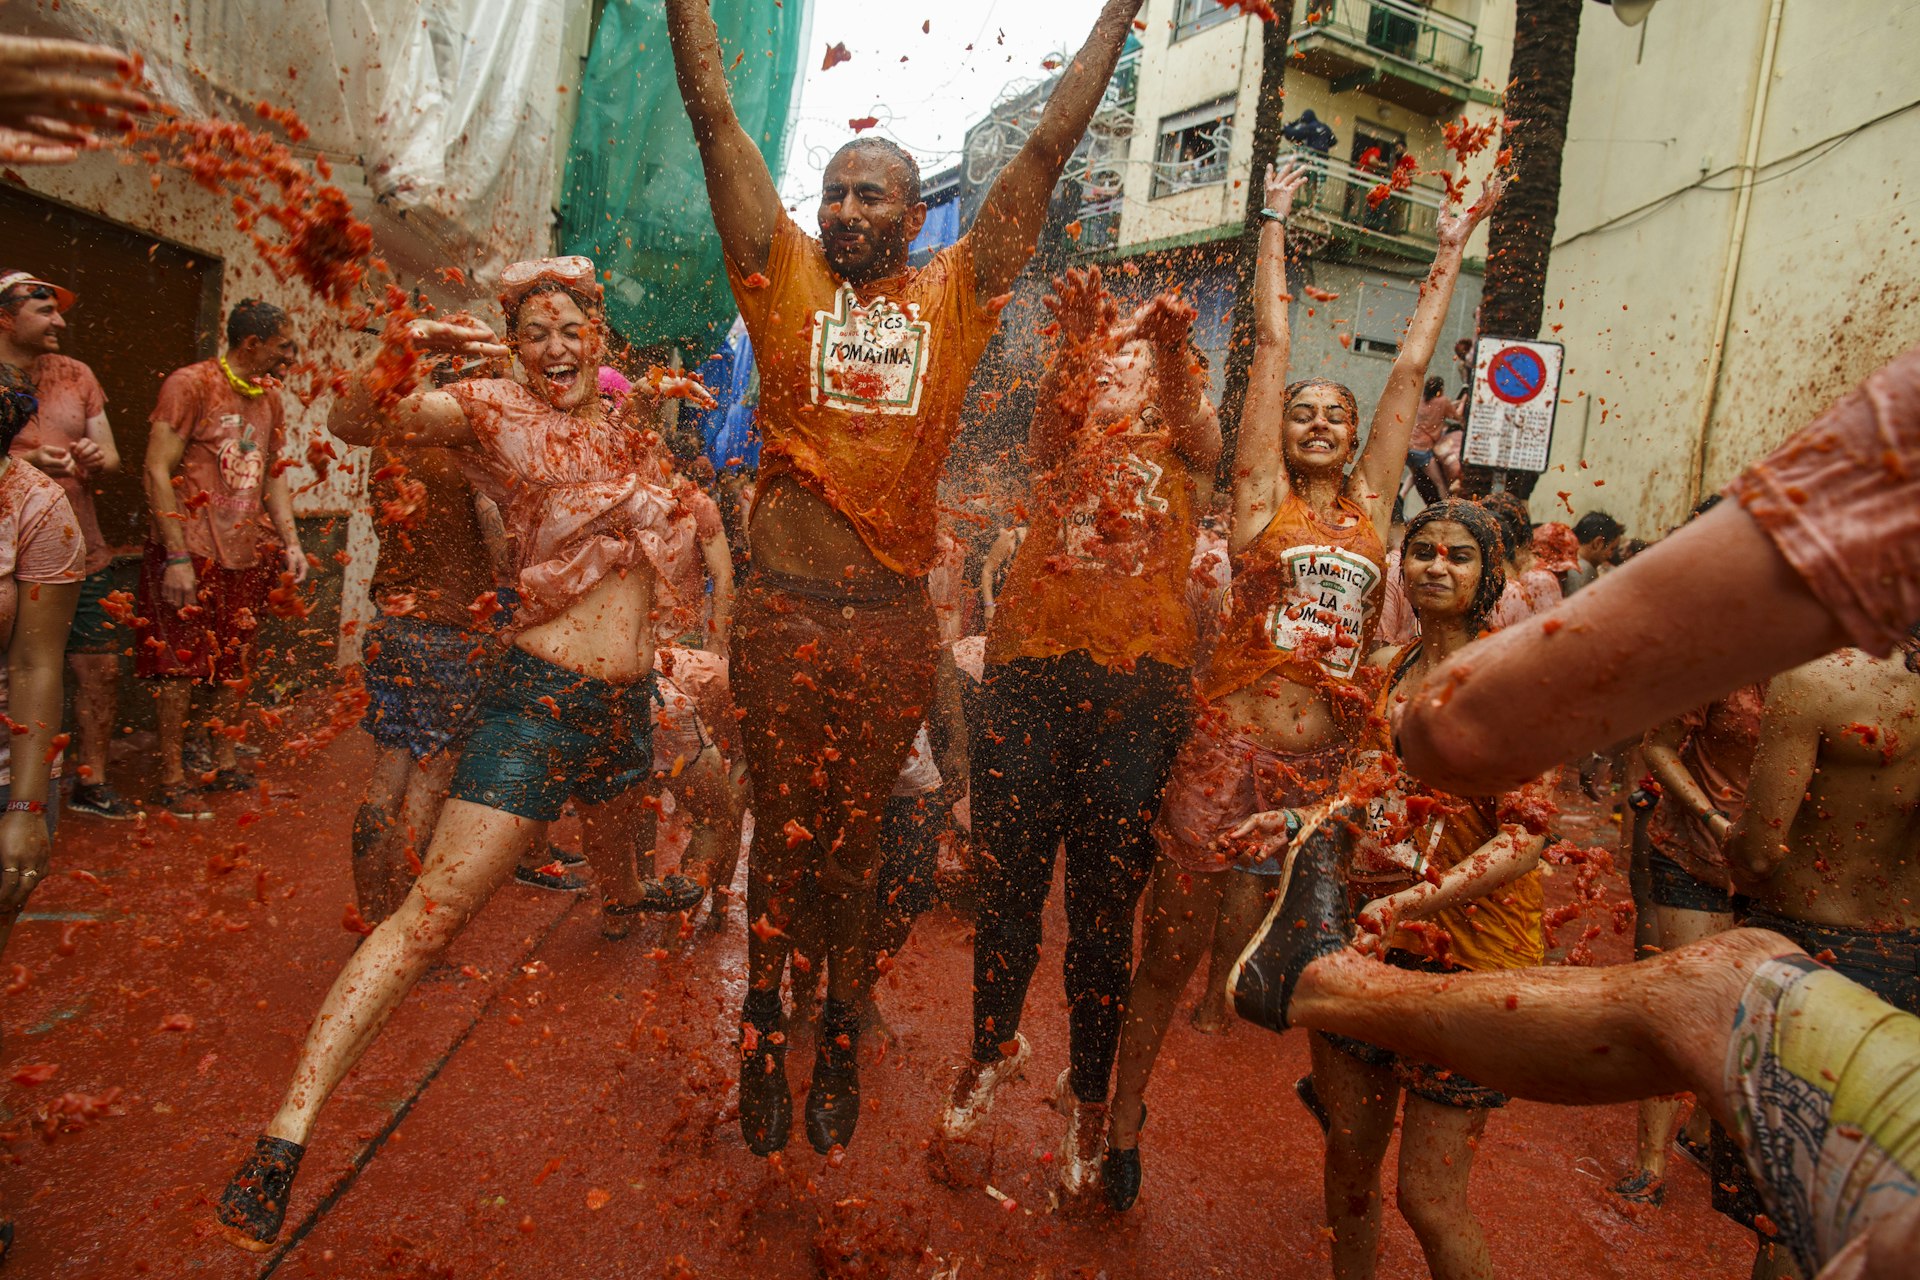 Revelers at the annual Tomatina festival